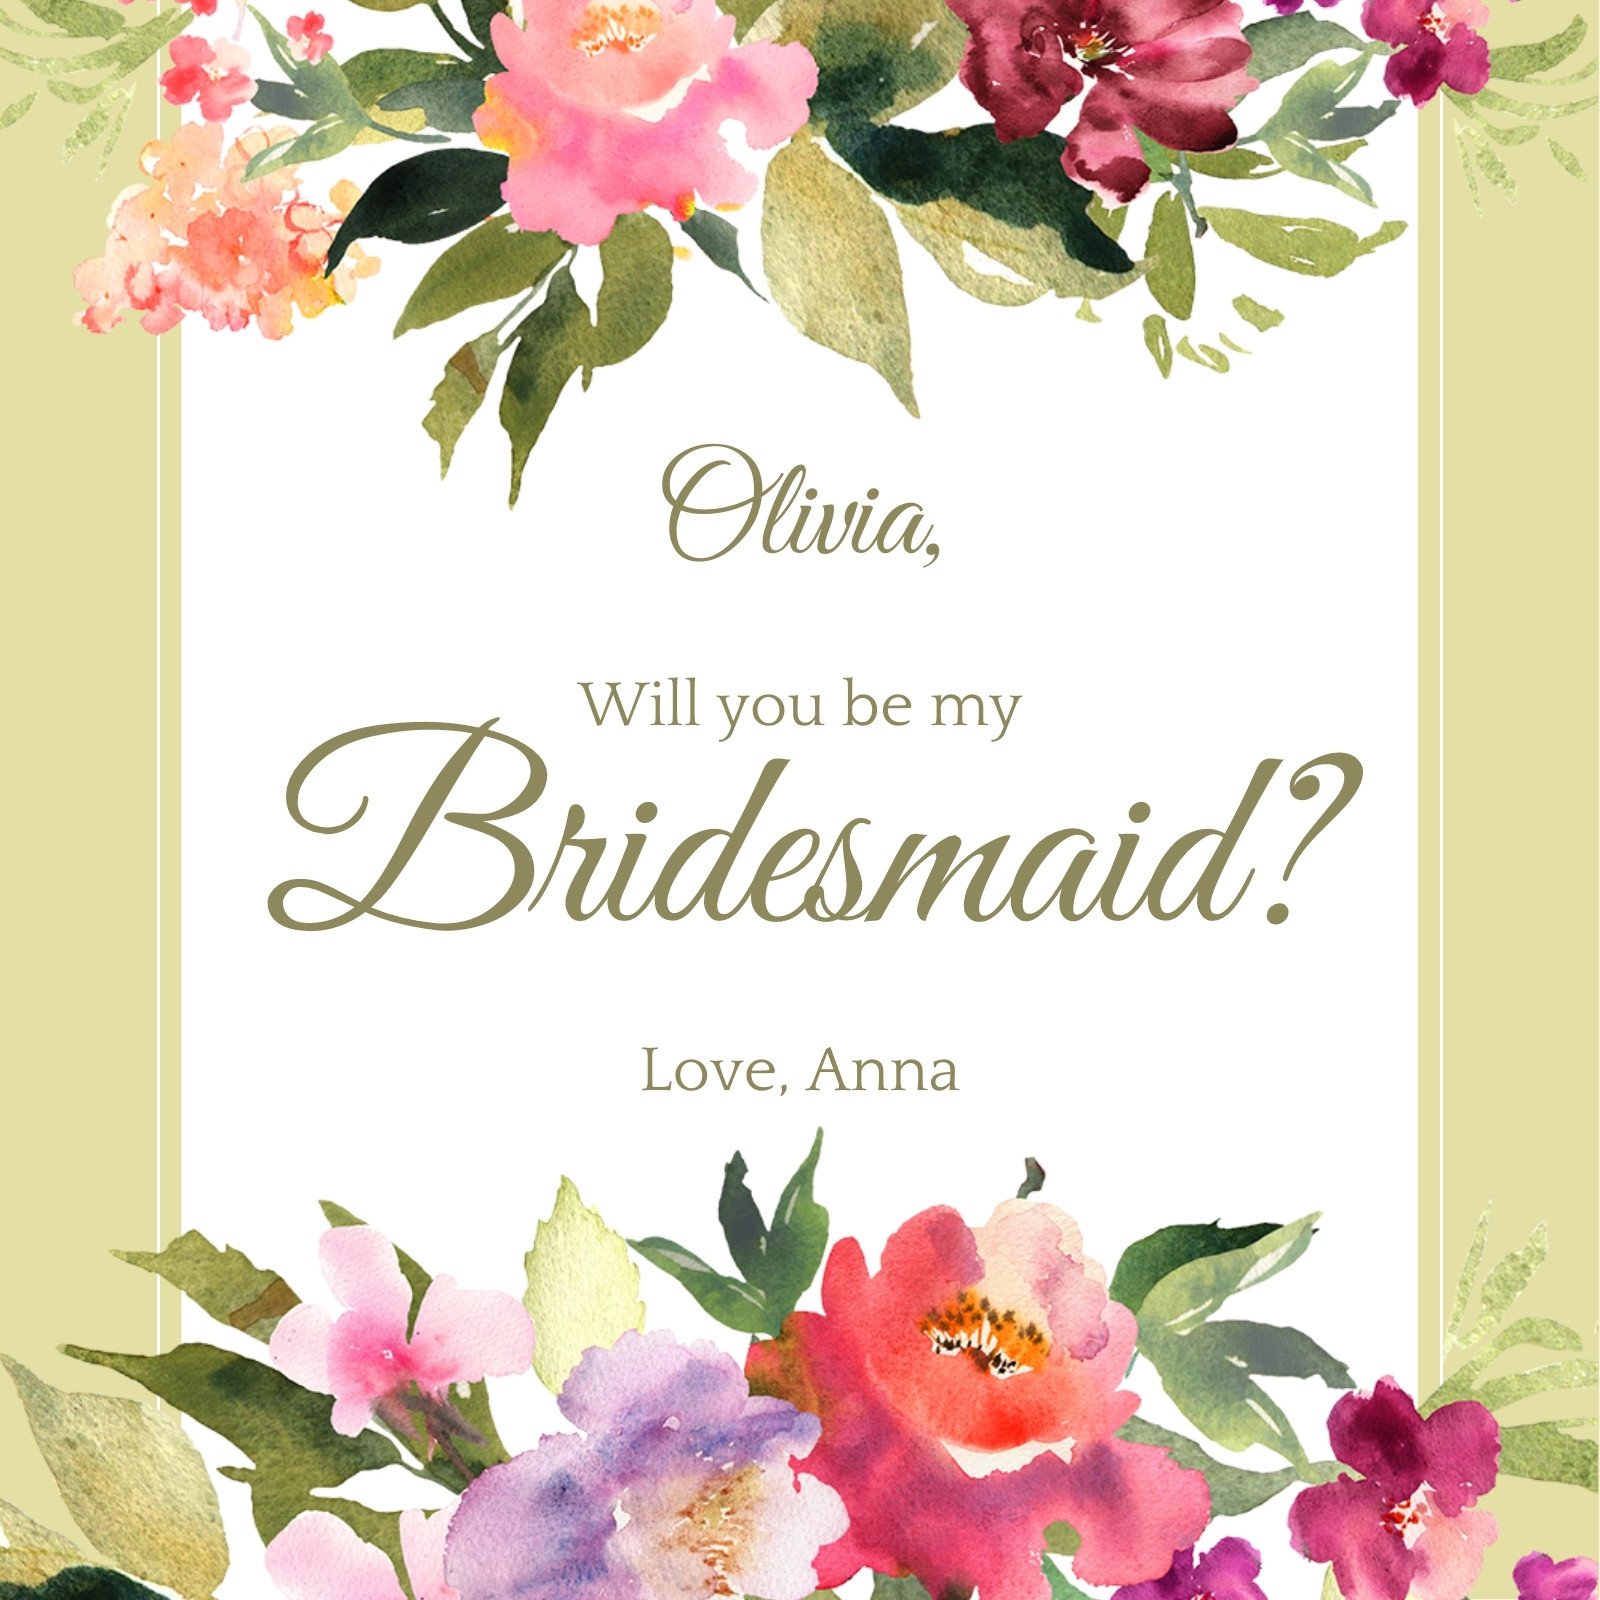 will-you-be-my-bridesmaid-proposal-card-editable-template-with-photo-postcard-size-printable